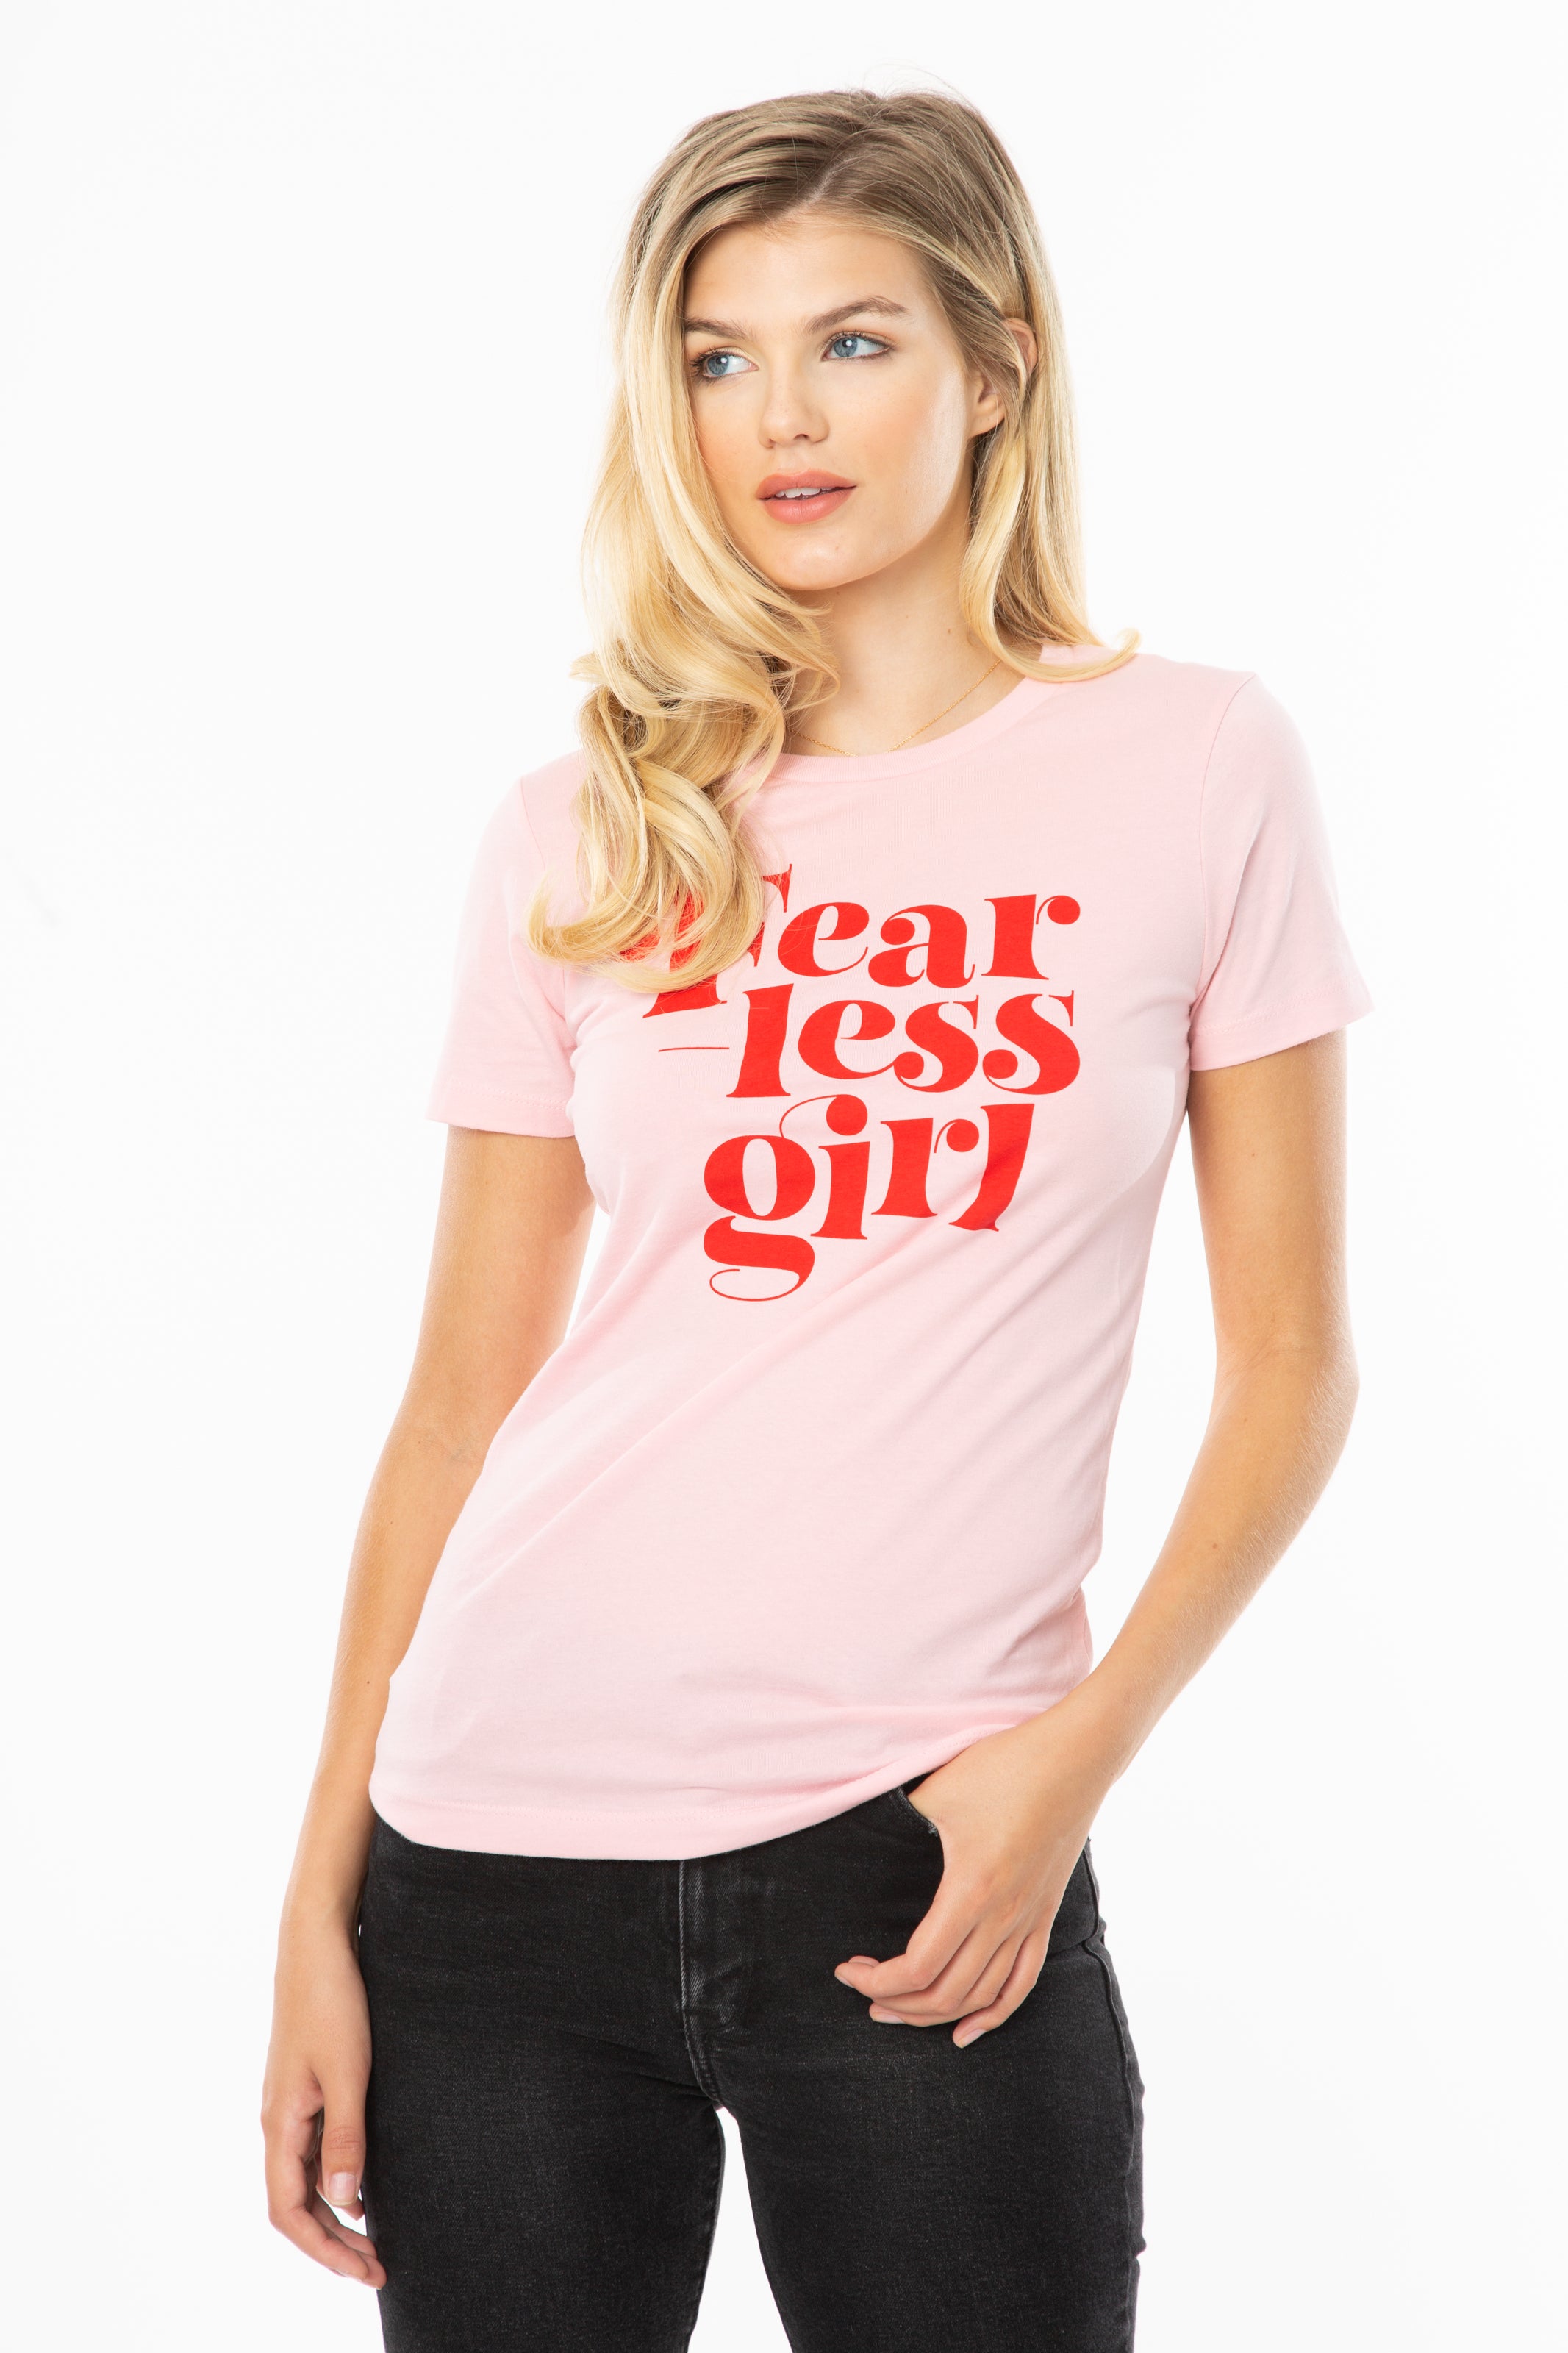 Fearless Girl Feminist Graphic Tee - Pink